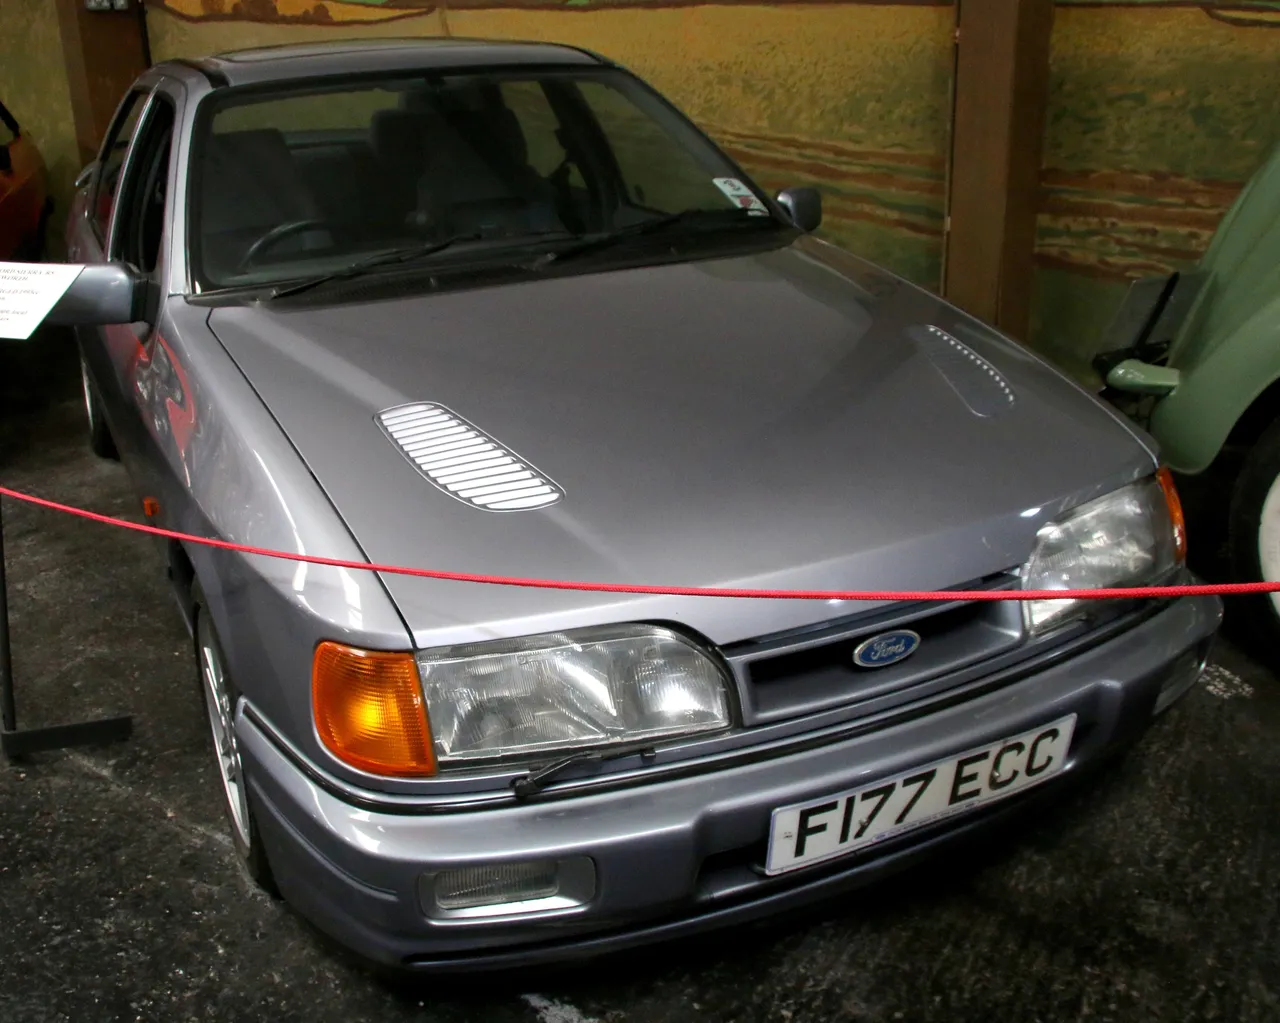 A Ford Sierra RS Cosworth, Sapphire generation. The bonnet vent overlaps a very prominent styling line on the bonnet.